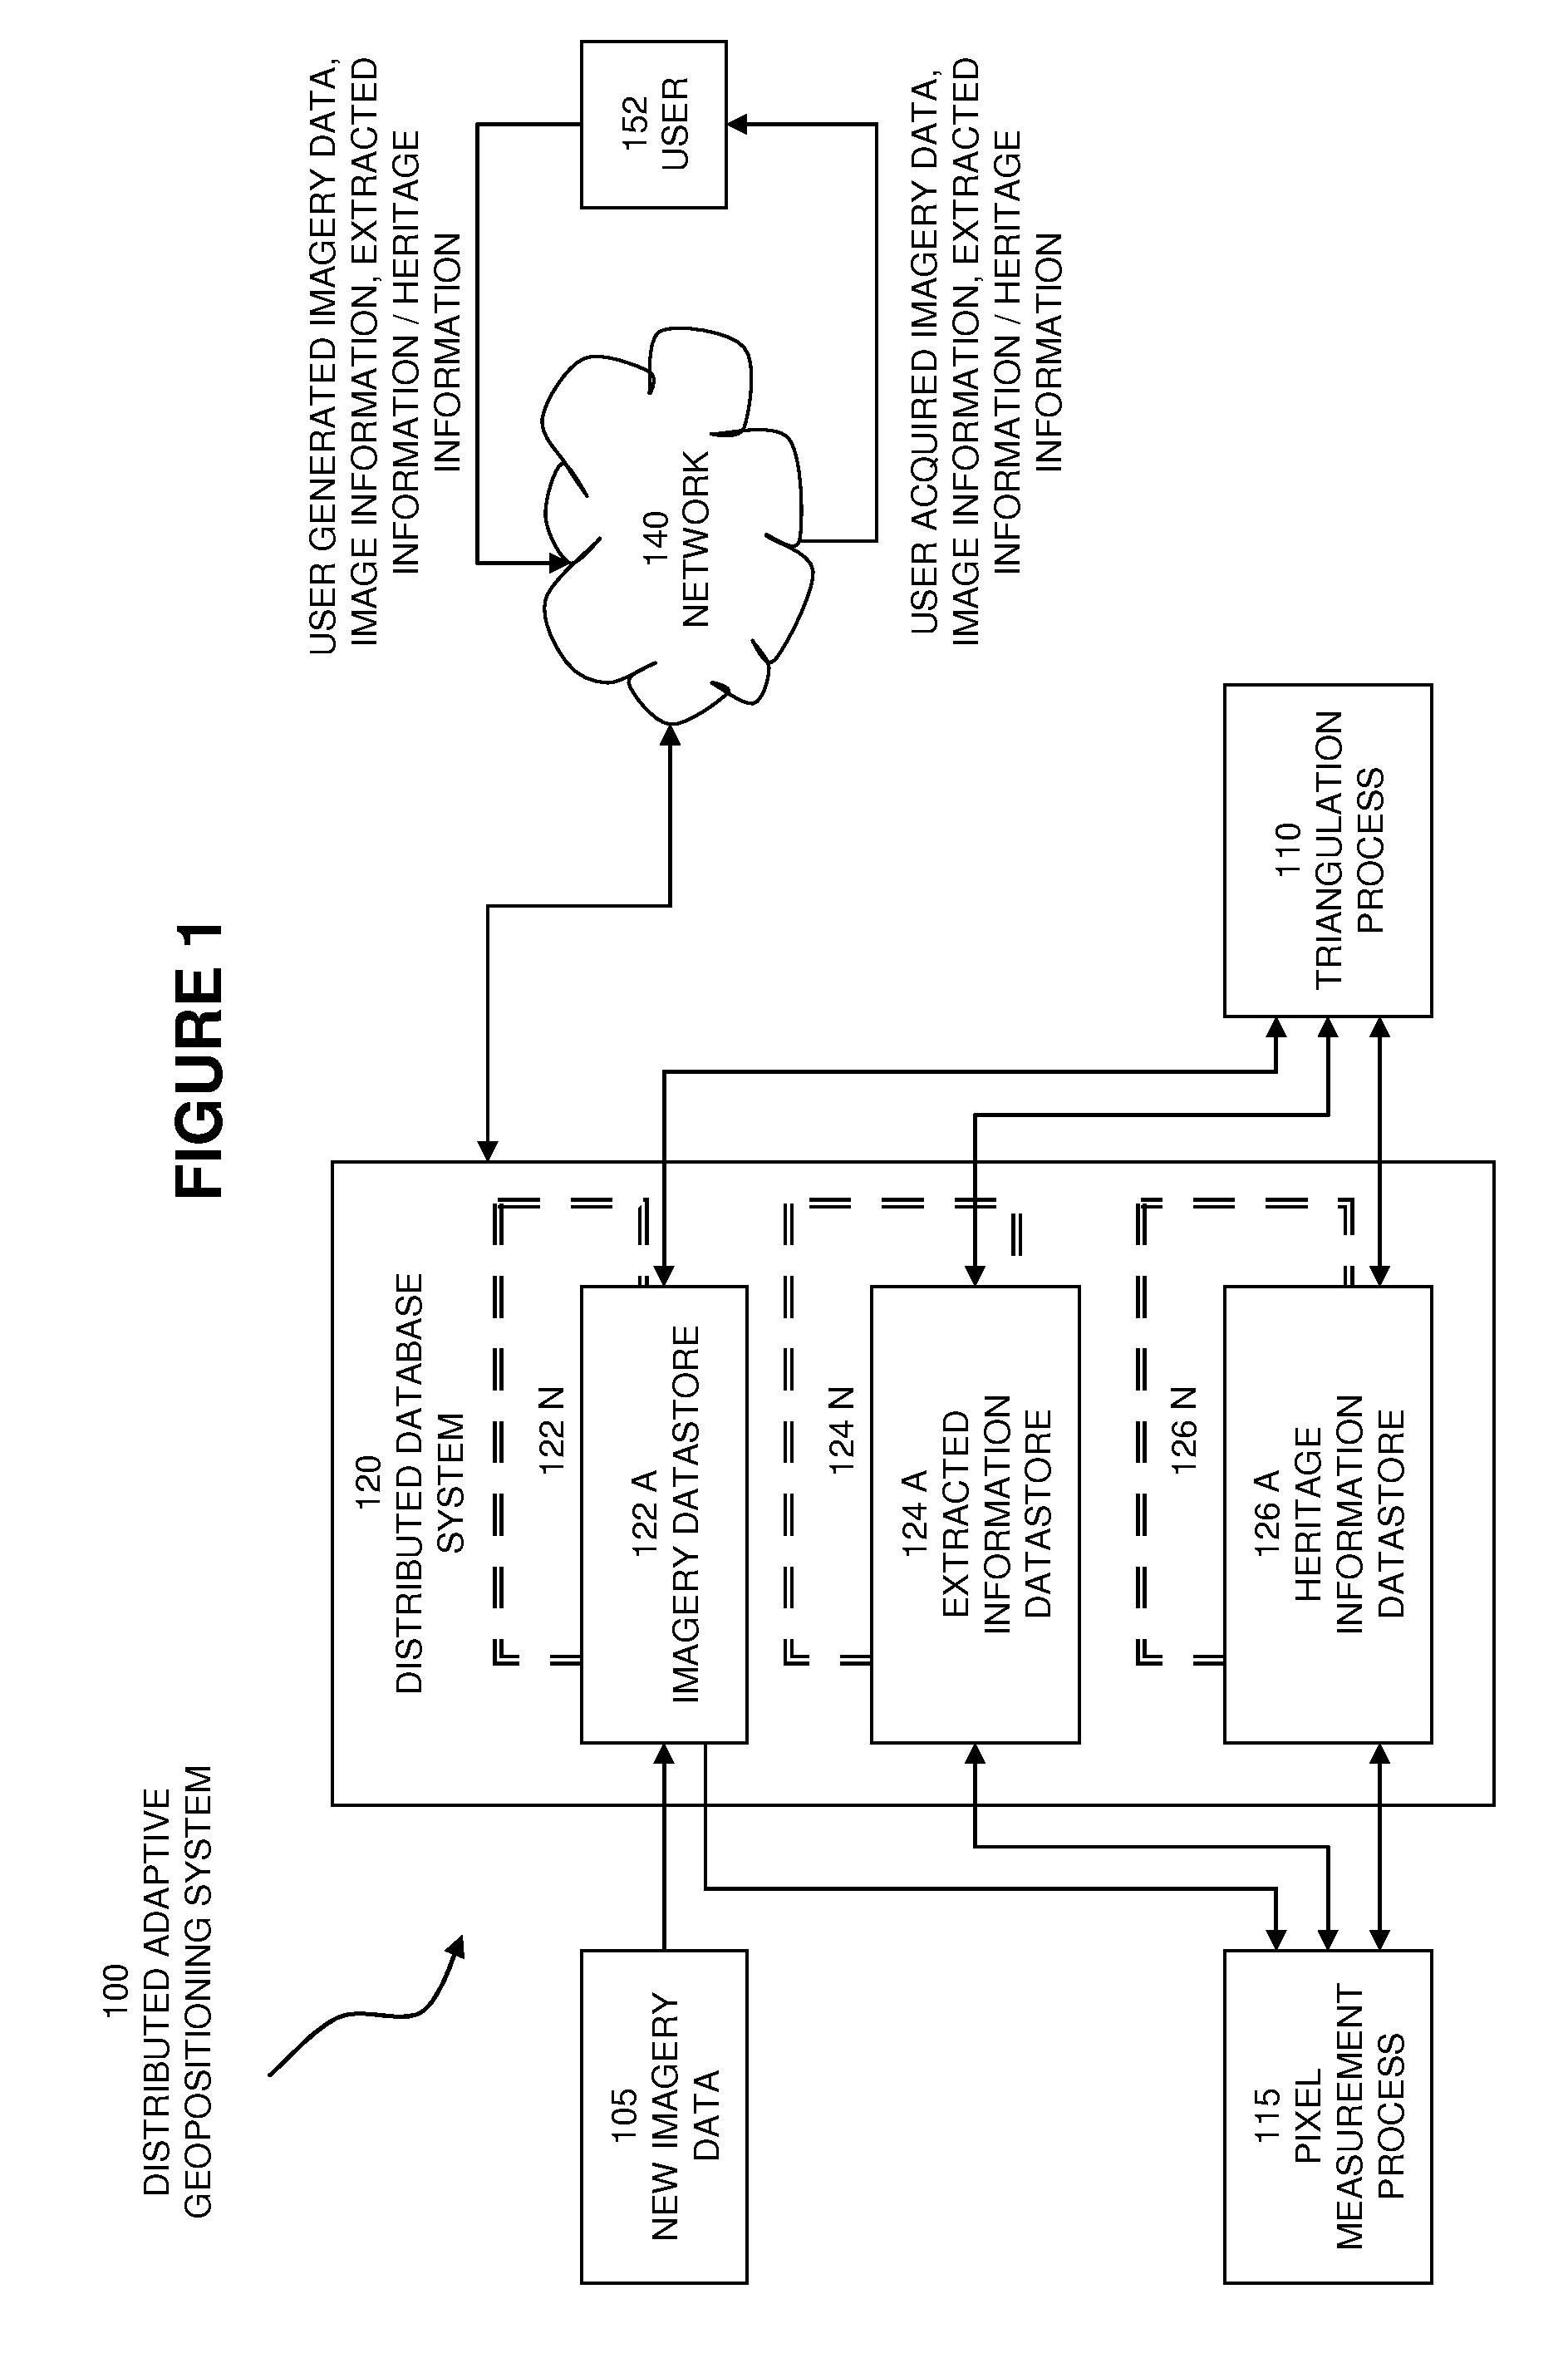 System and methods for dynamically generating earth position data for overhead images and derived information